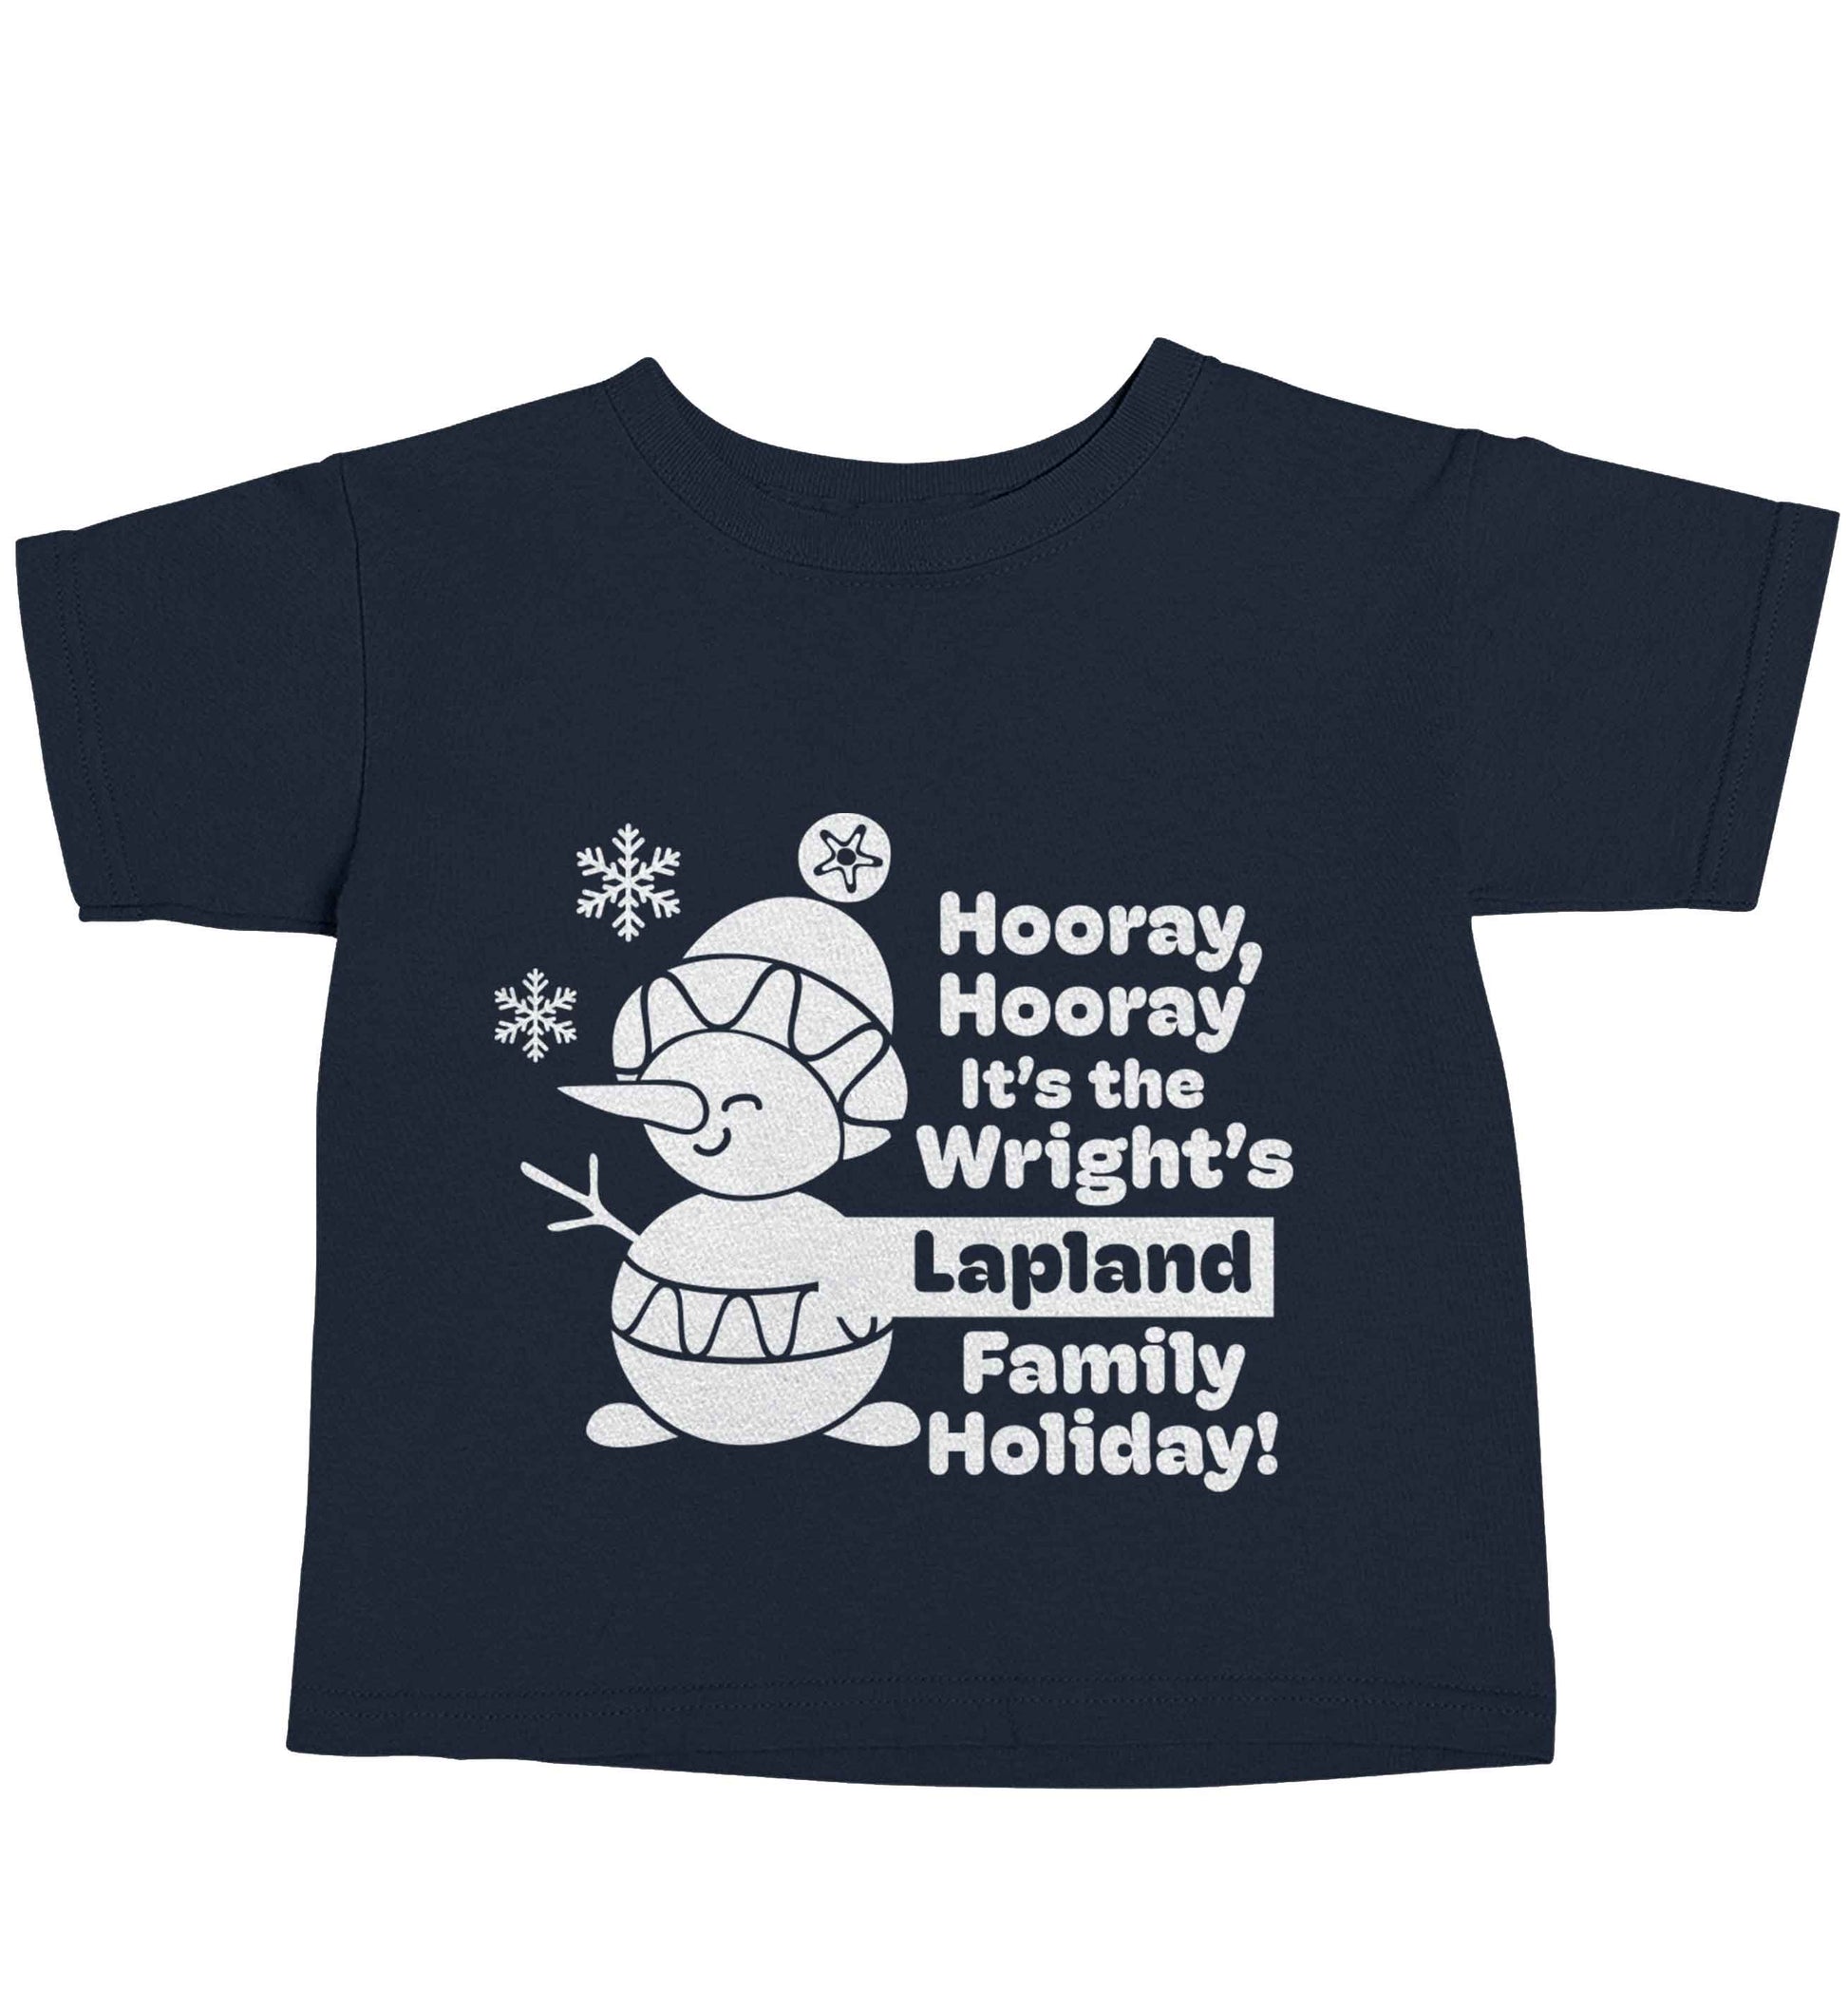 Hooray it's the personalised Lapland holiday! navy baby toddler Tshirt 2 Years